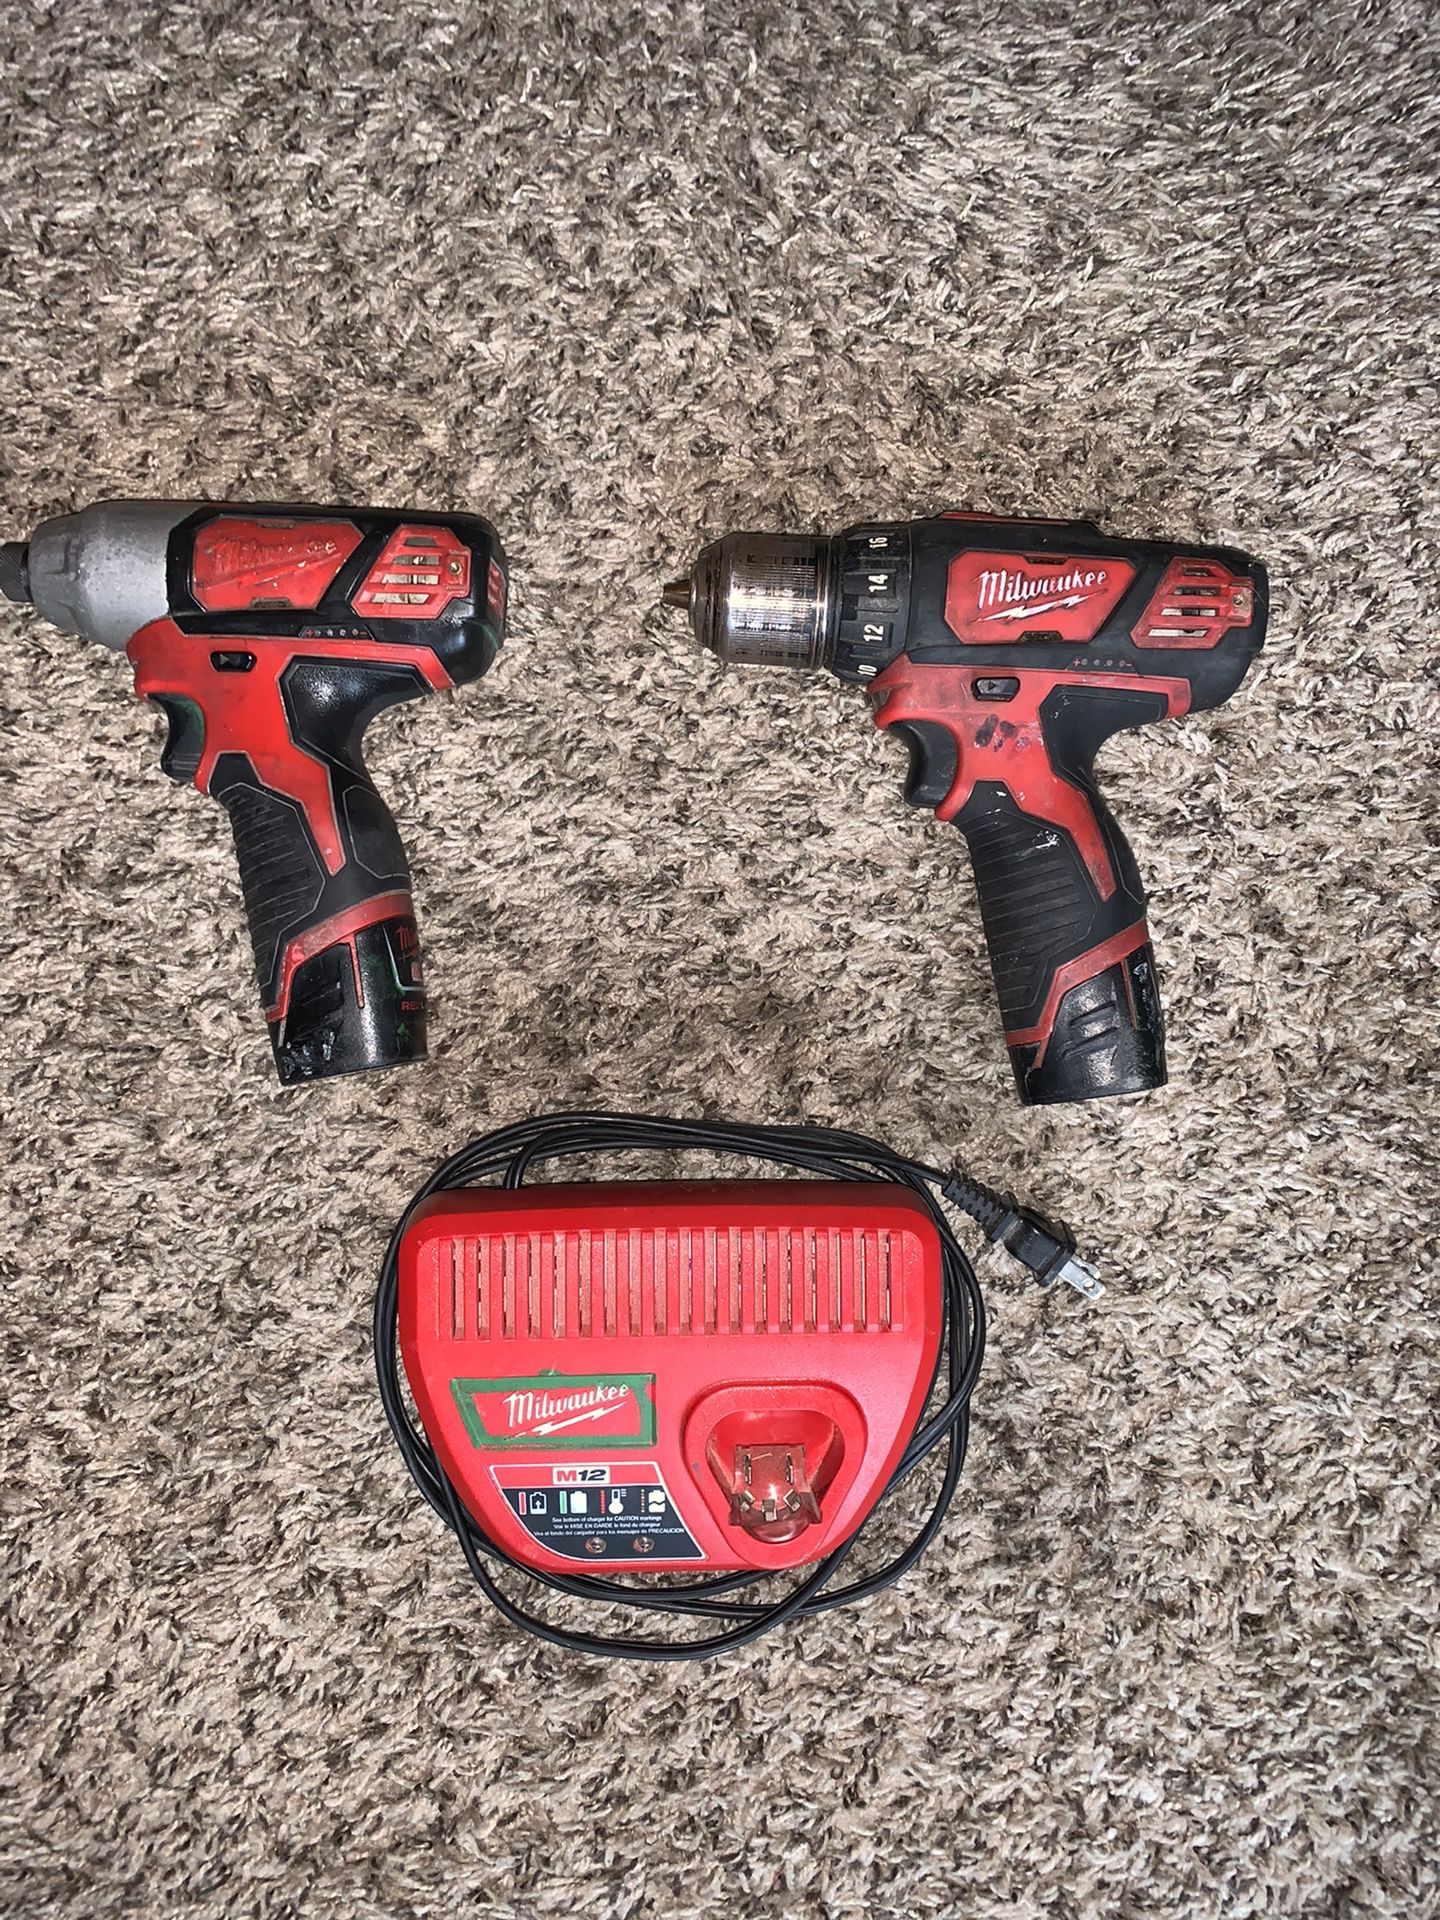 Milwaukee 12V Drill and Impact with 2 batteries and charger